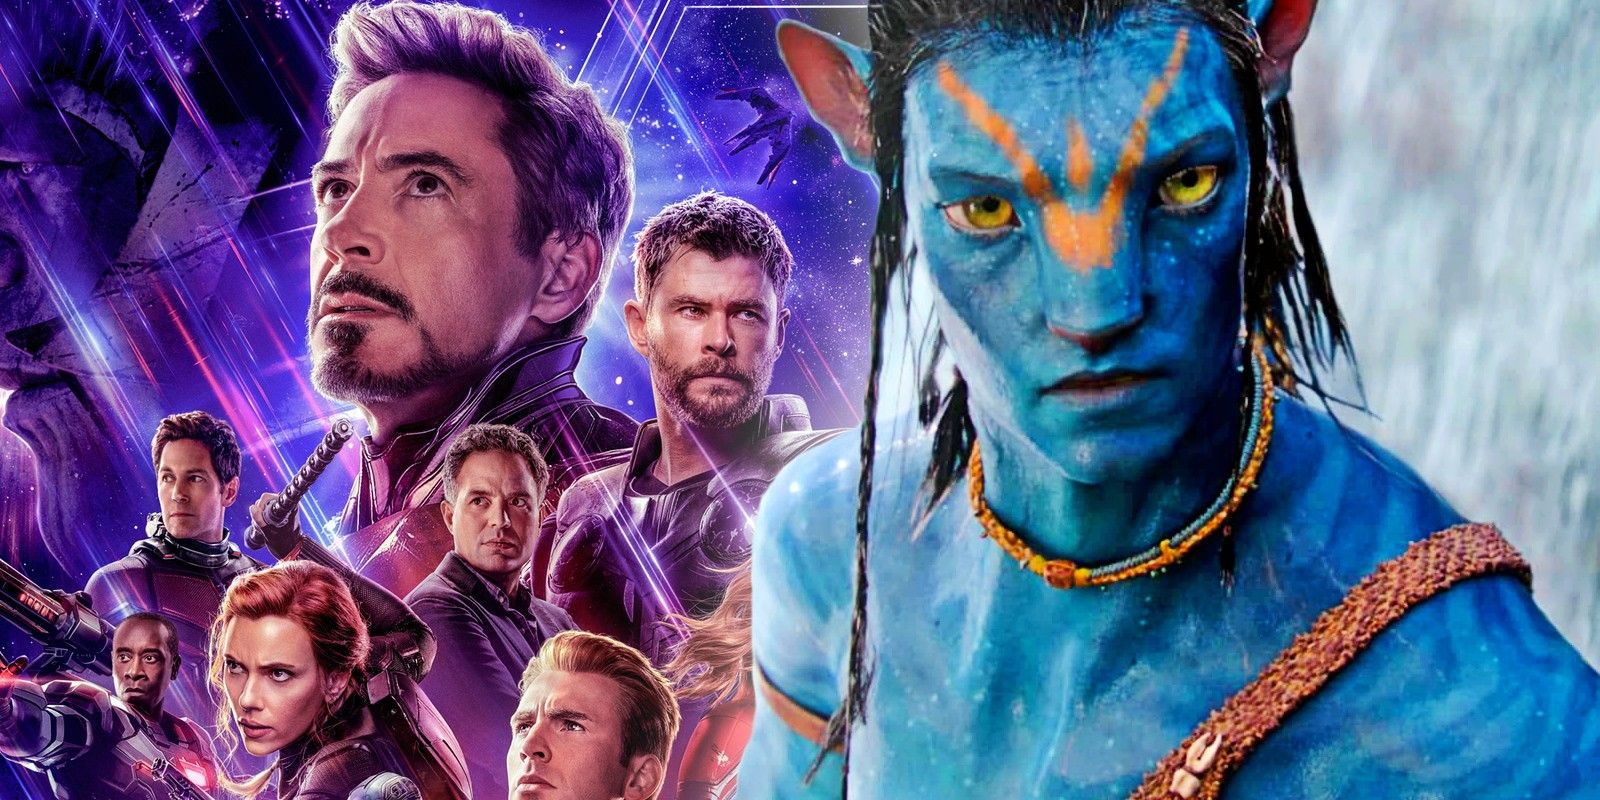 Endgame Beating Avatar's Box Office Again Just Became Even Harder